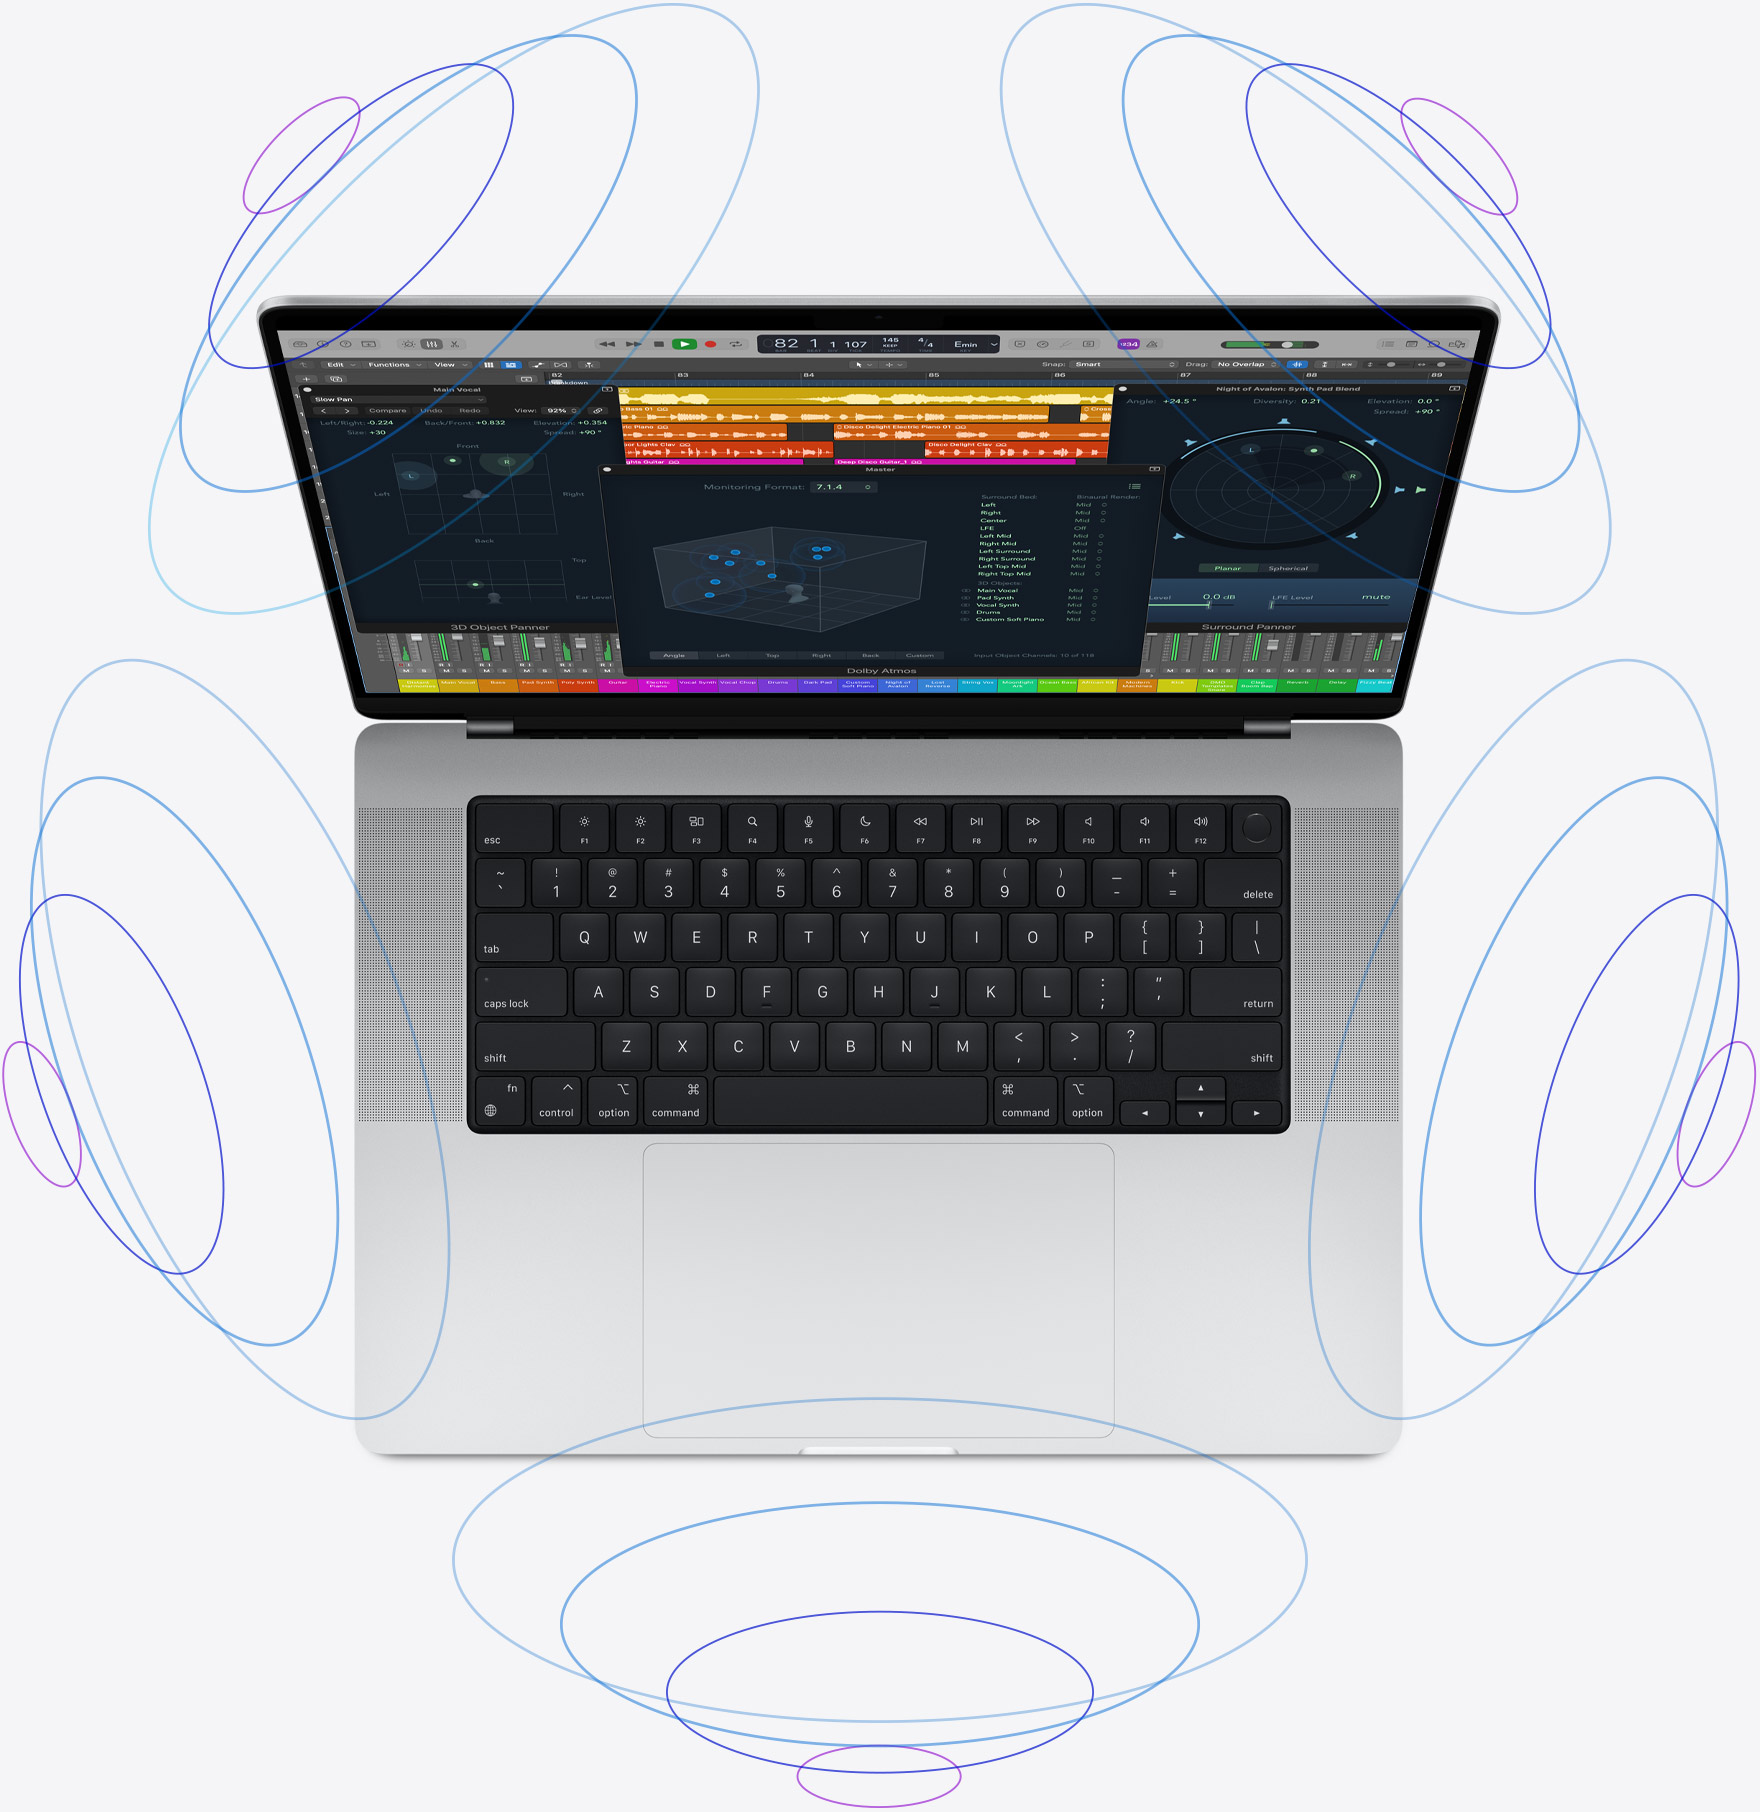 Spatial Audio on the MacBook Pro